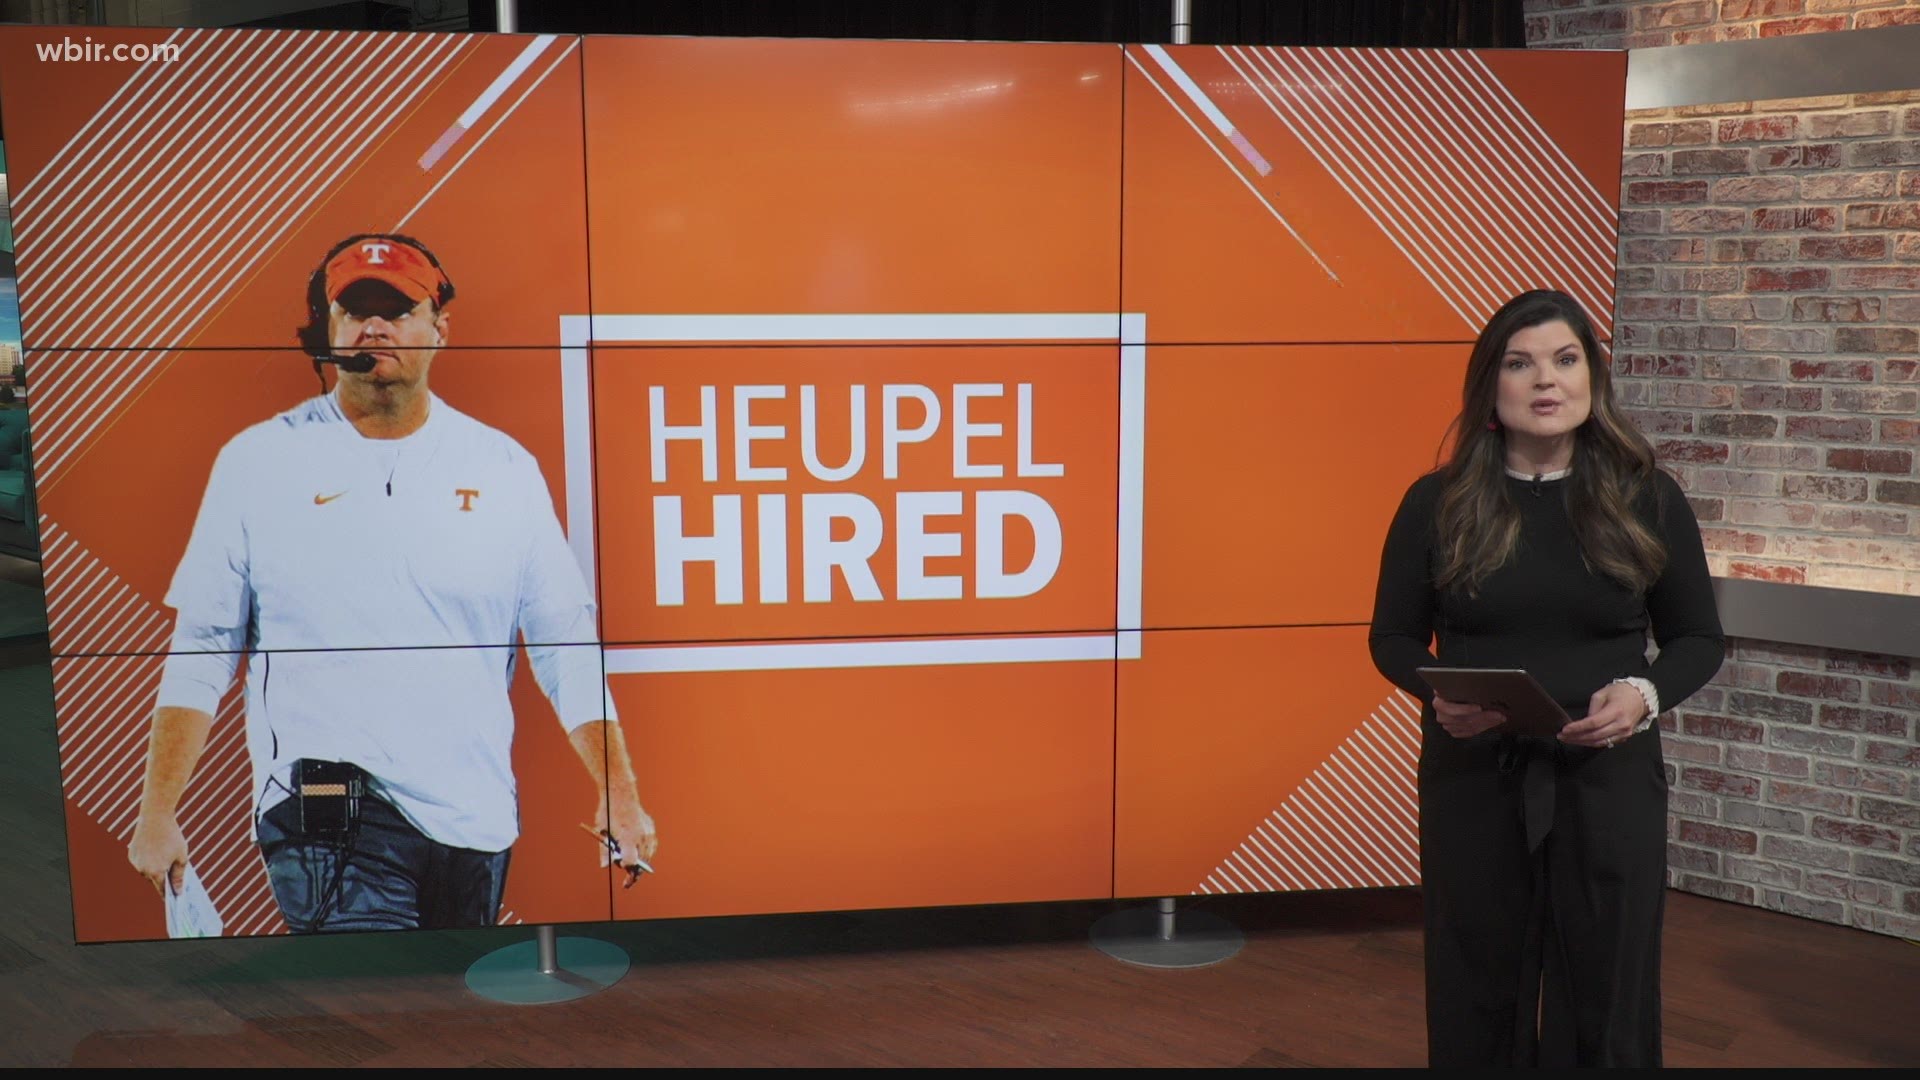 UT officially introduced Josh Heupel as the new head football coach. The hire came just eight days after the school hired athletics director Danny White.